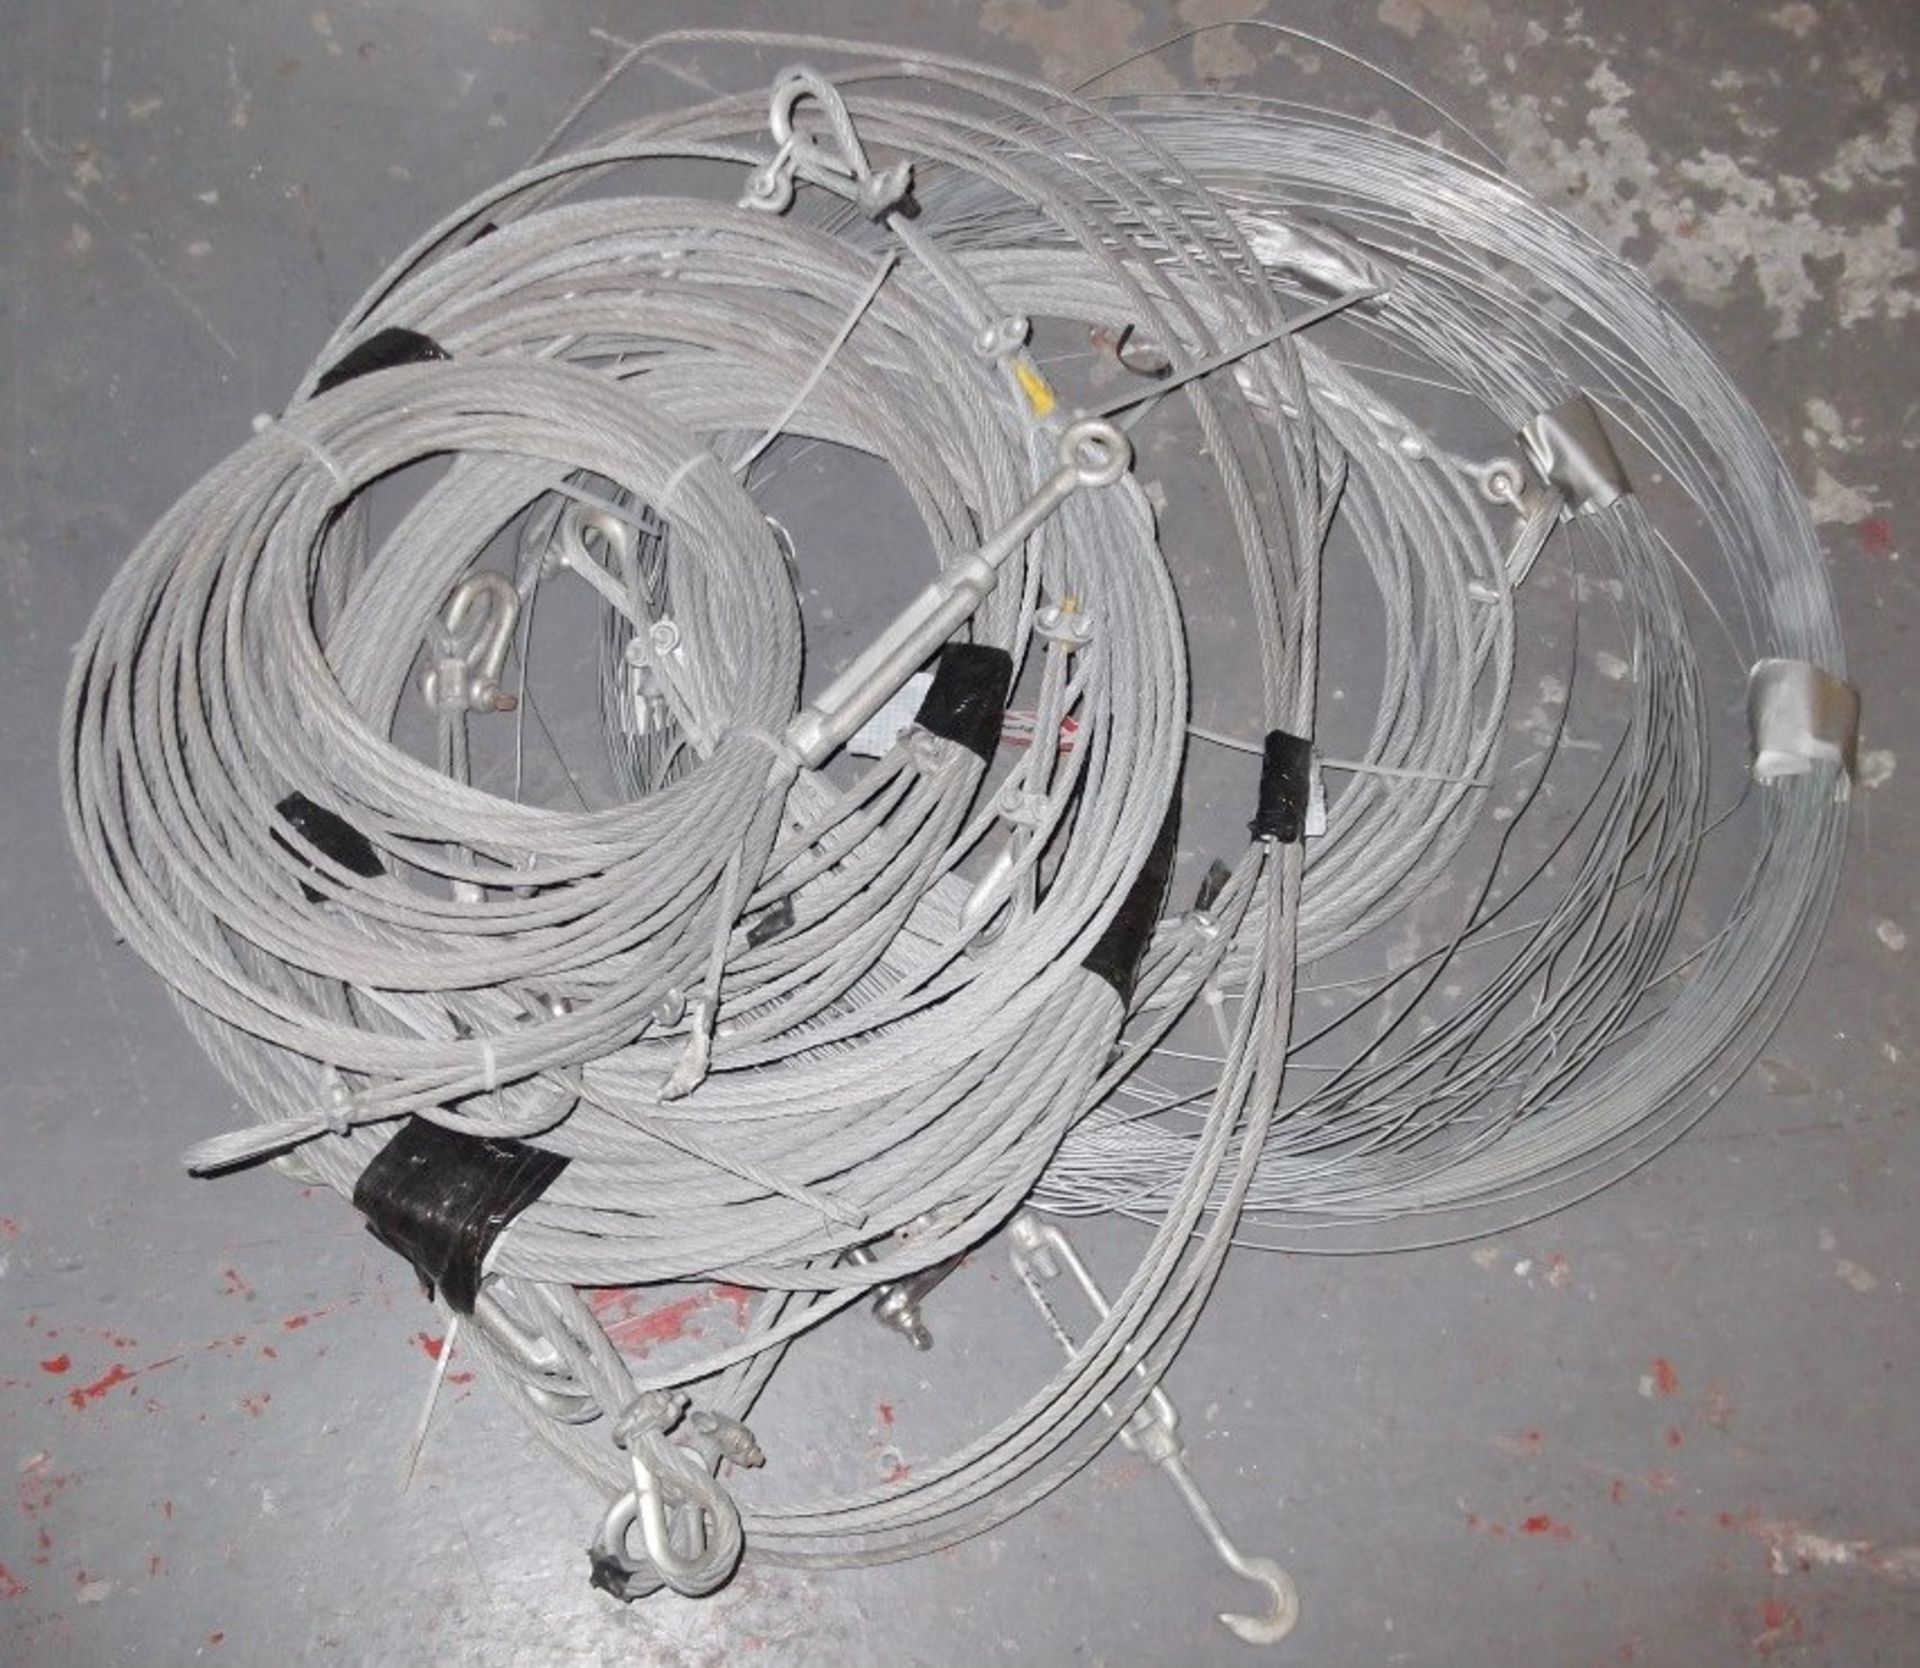 9 x Assorted Coils Of Catenary Wire - Supplied In A Variety Of Thicknesses And Lengths, Most With